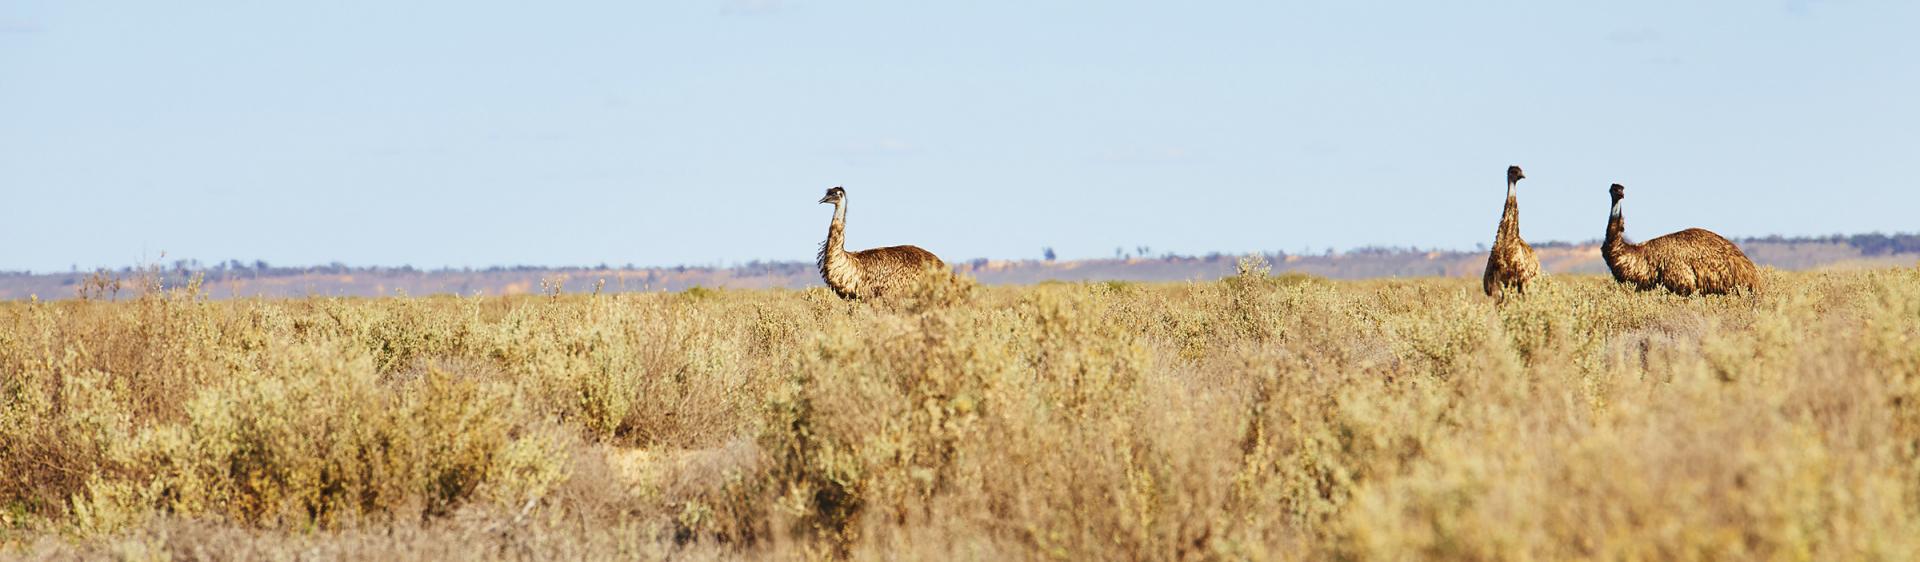 Emus in The Outback, Mungo National Park